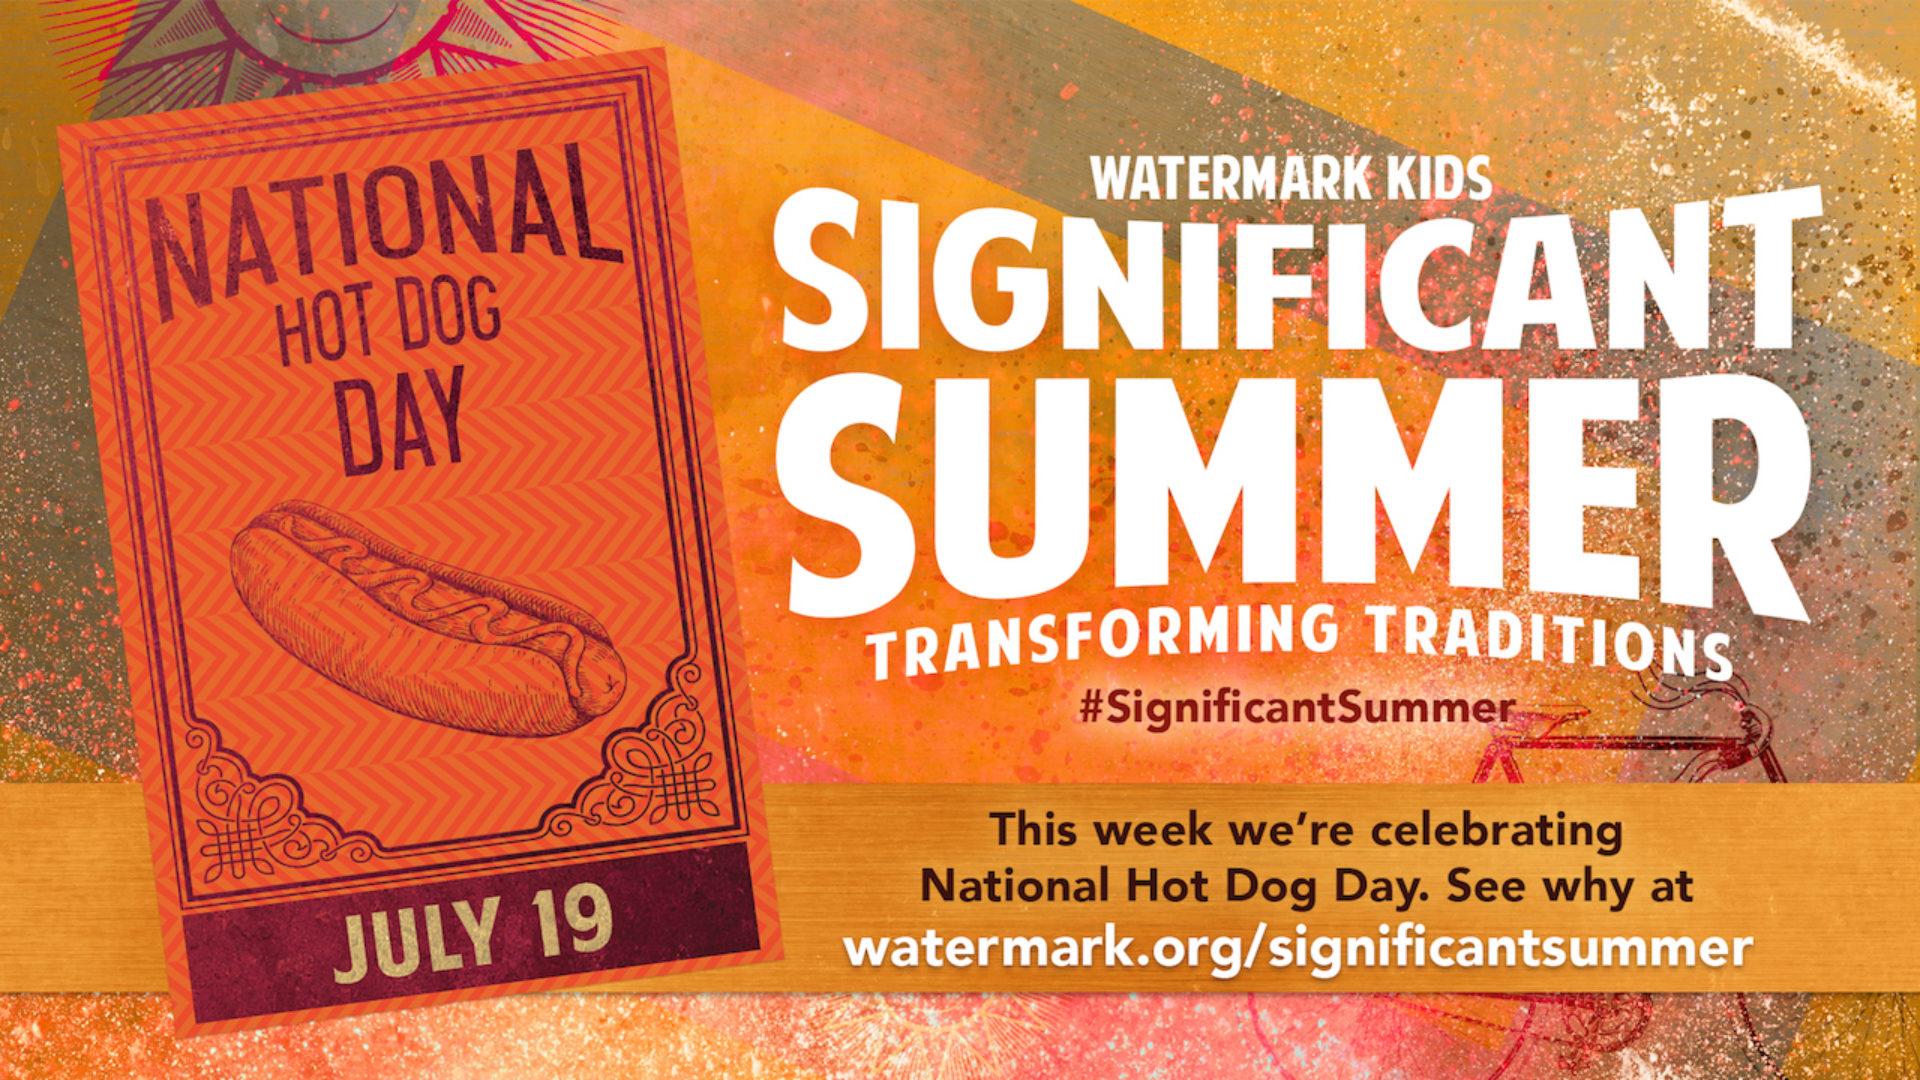 Significant Summer Week 7: National Hot Dog Day Hero Image